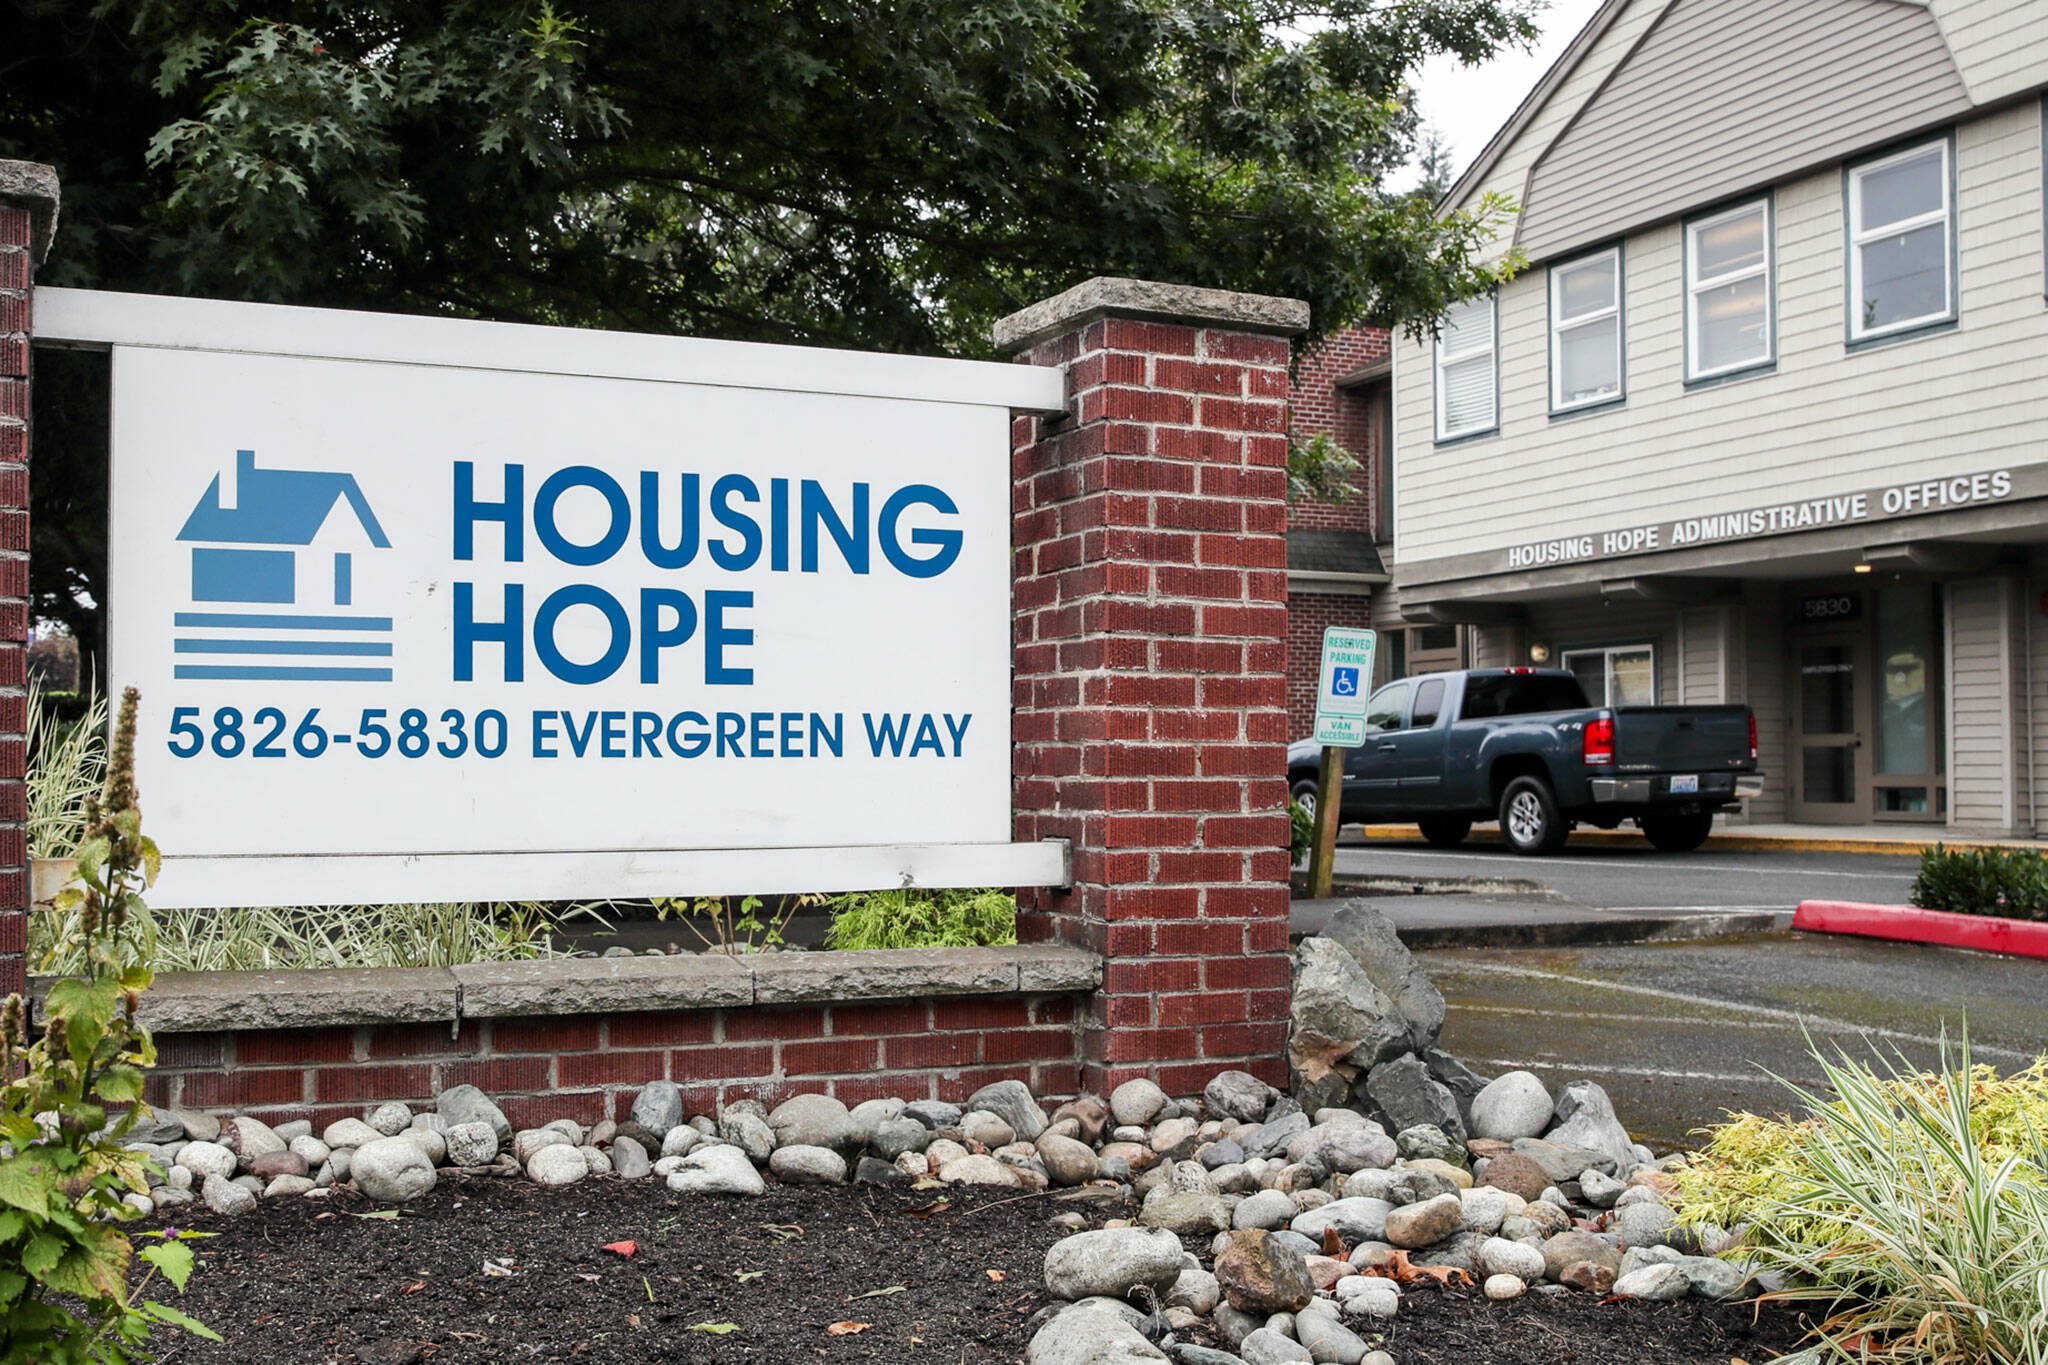 Housing Hope Administrative Offices in Everett, Washington on October 5, 2022. (Kevin Clark / The Herald)